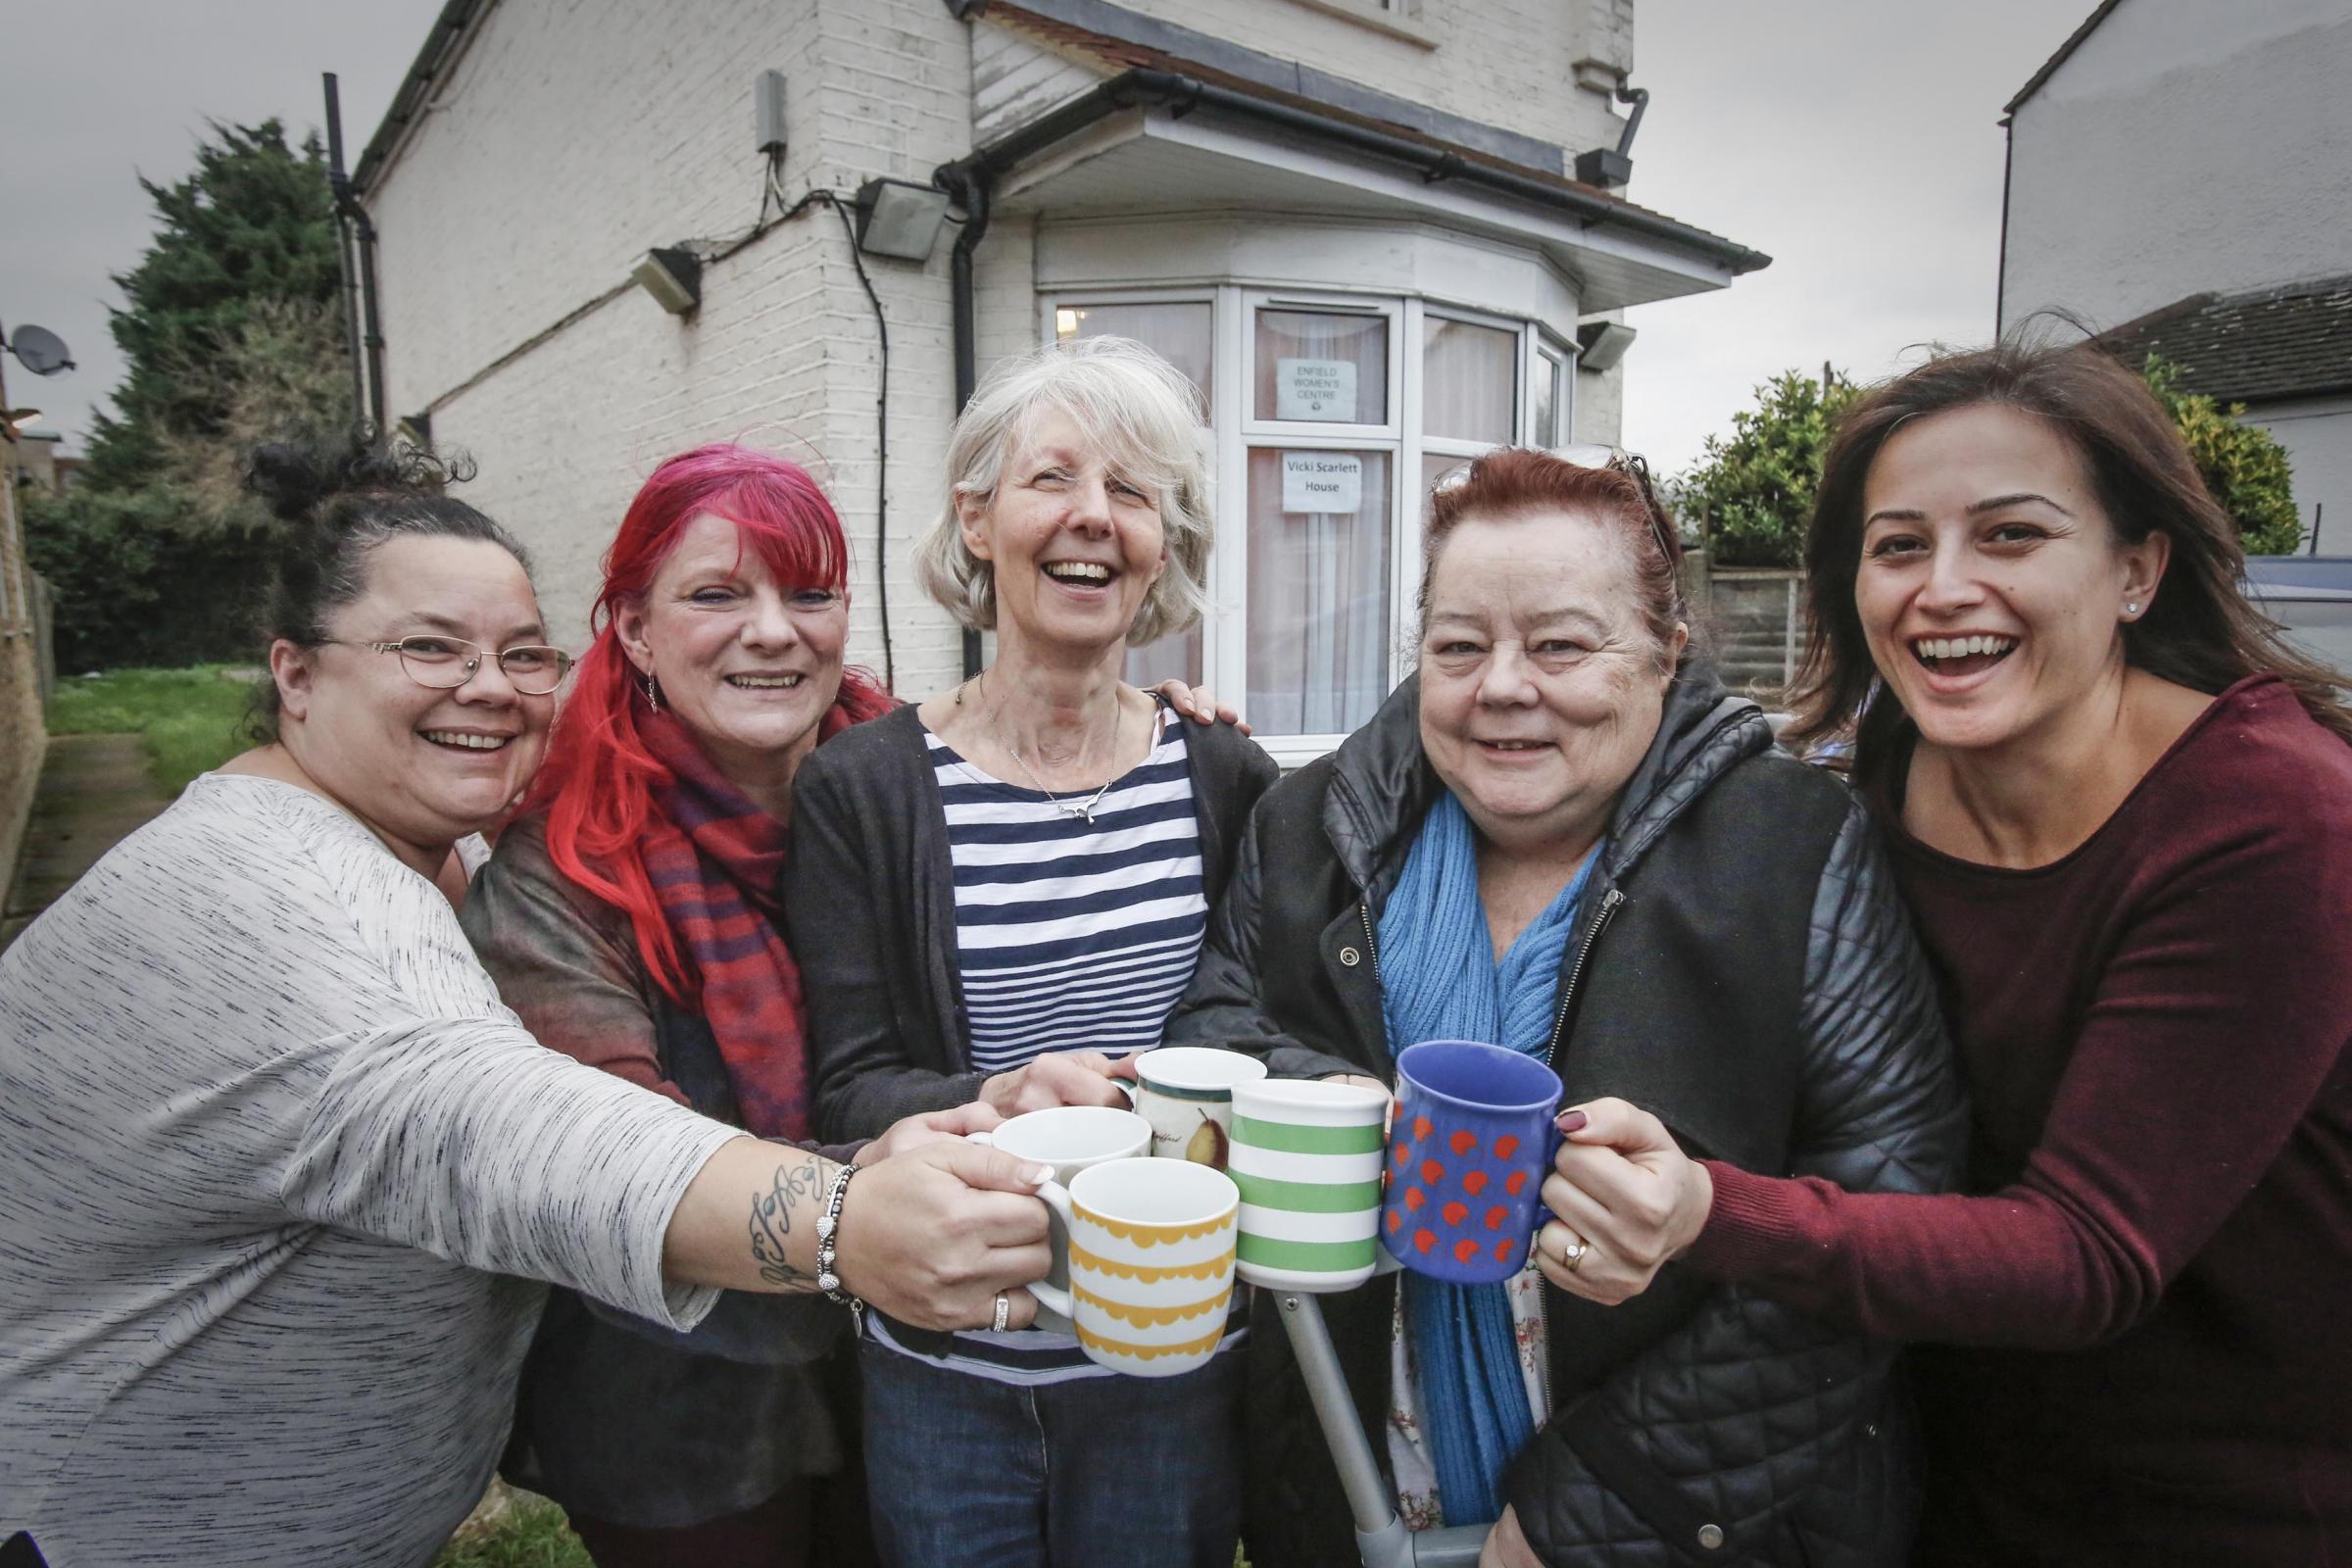 Women's centre receives £10,000 grant | Enfield Independent